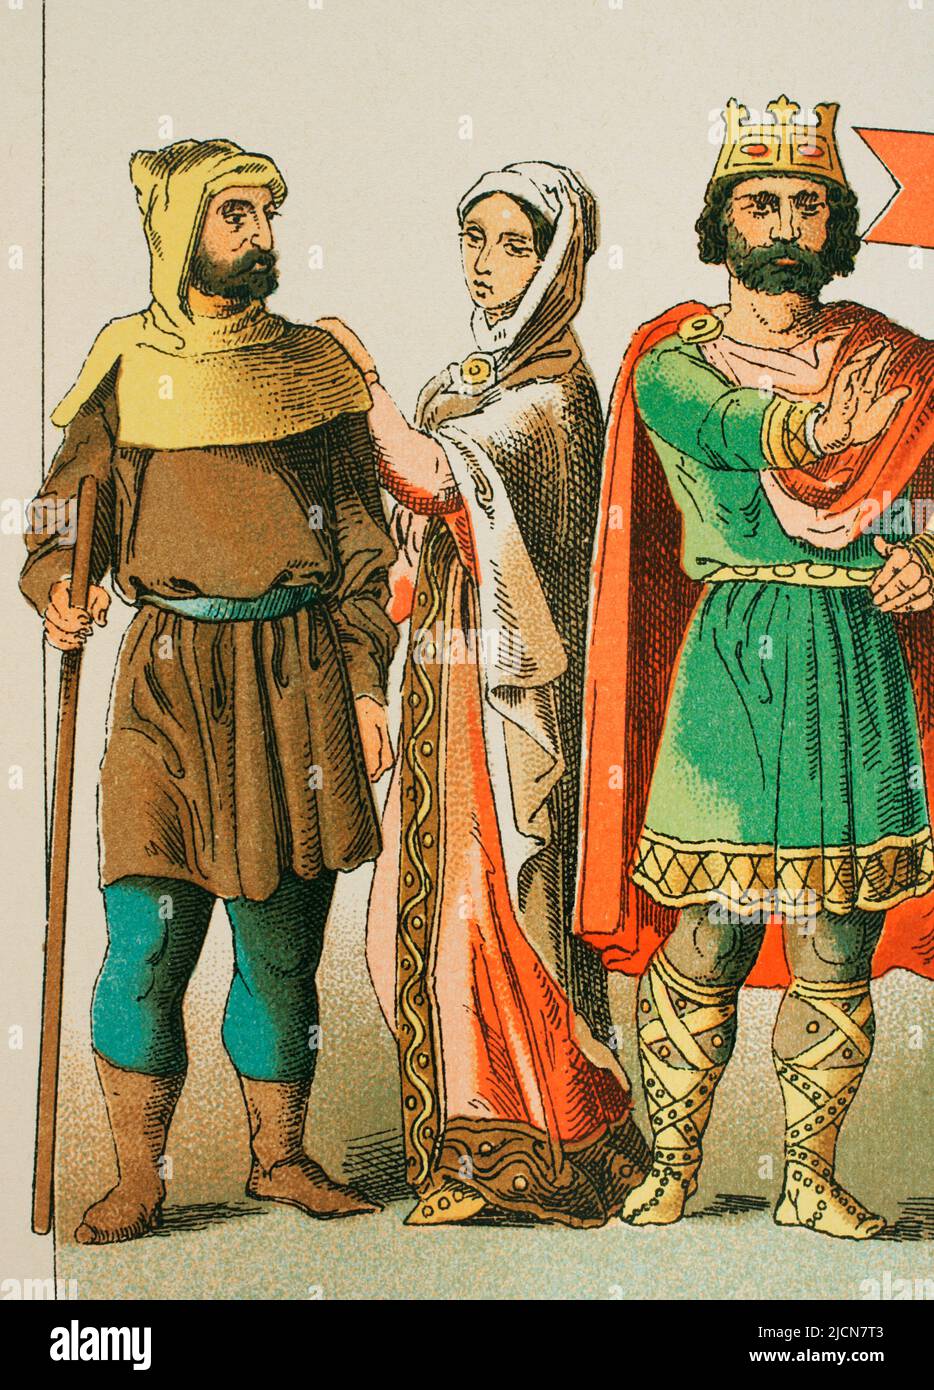 Middle Ages. History of France (year 900). From left to right: Man of the people, noblewoman and king. Chromolithography. 'Historia Universal' (Universal History), by César Cantú. Volume IV. Published in Barcelona, 1881. Stock Photo